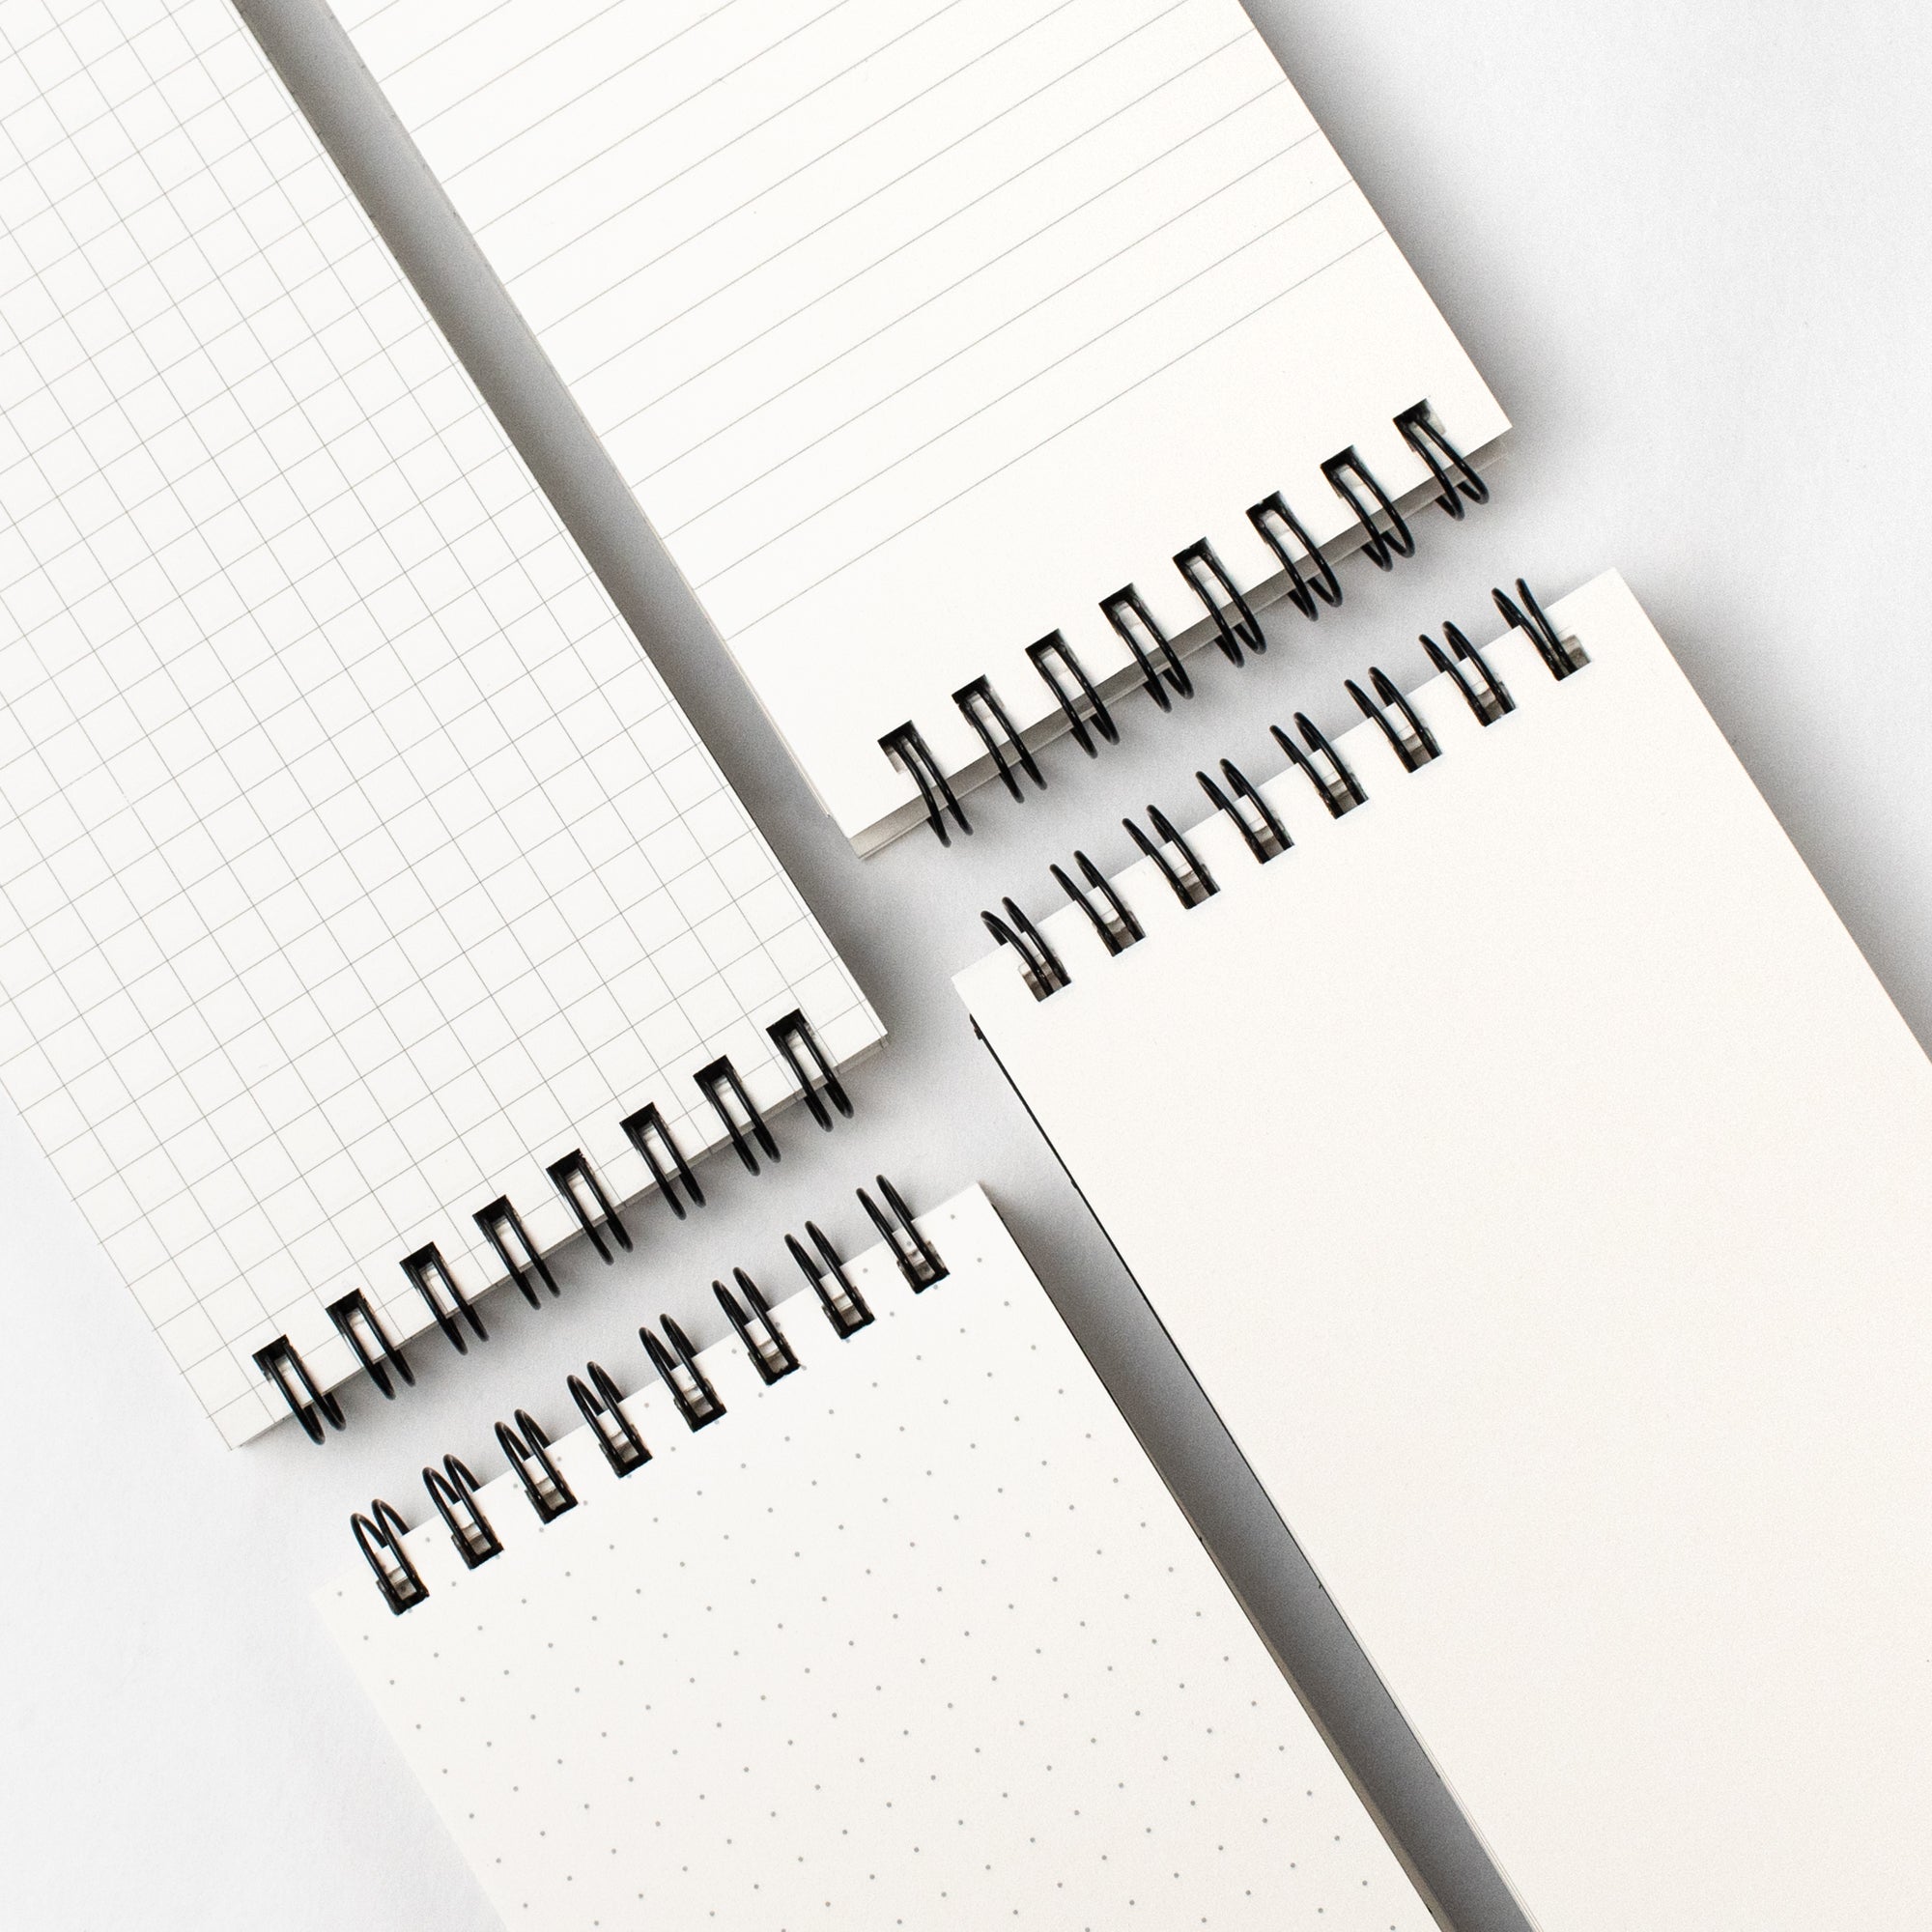 Three Blackwing Reporter Pads (Set of 2) for sketching and note-taking on a white surface.